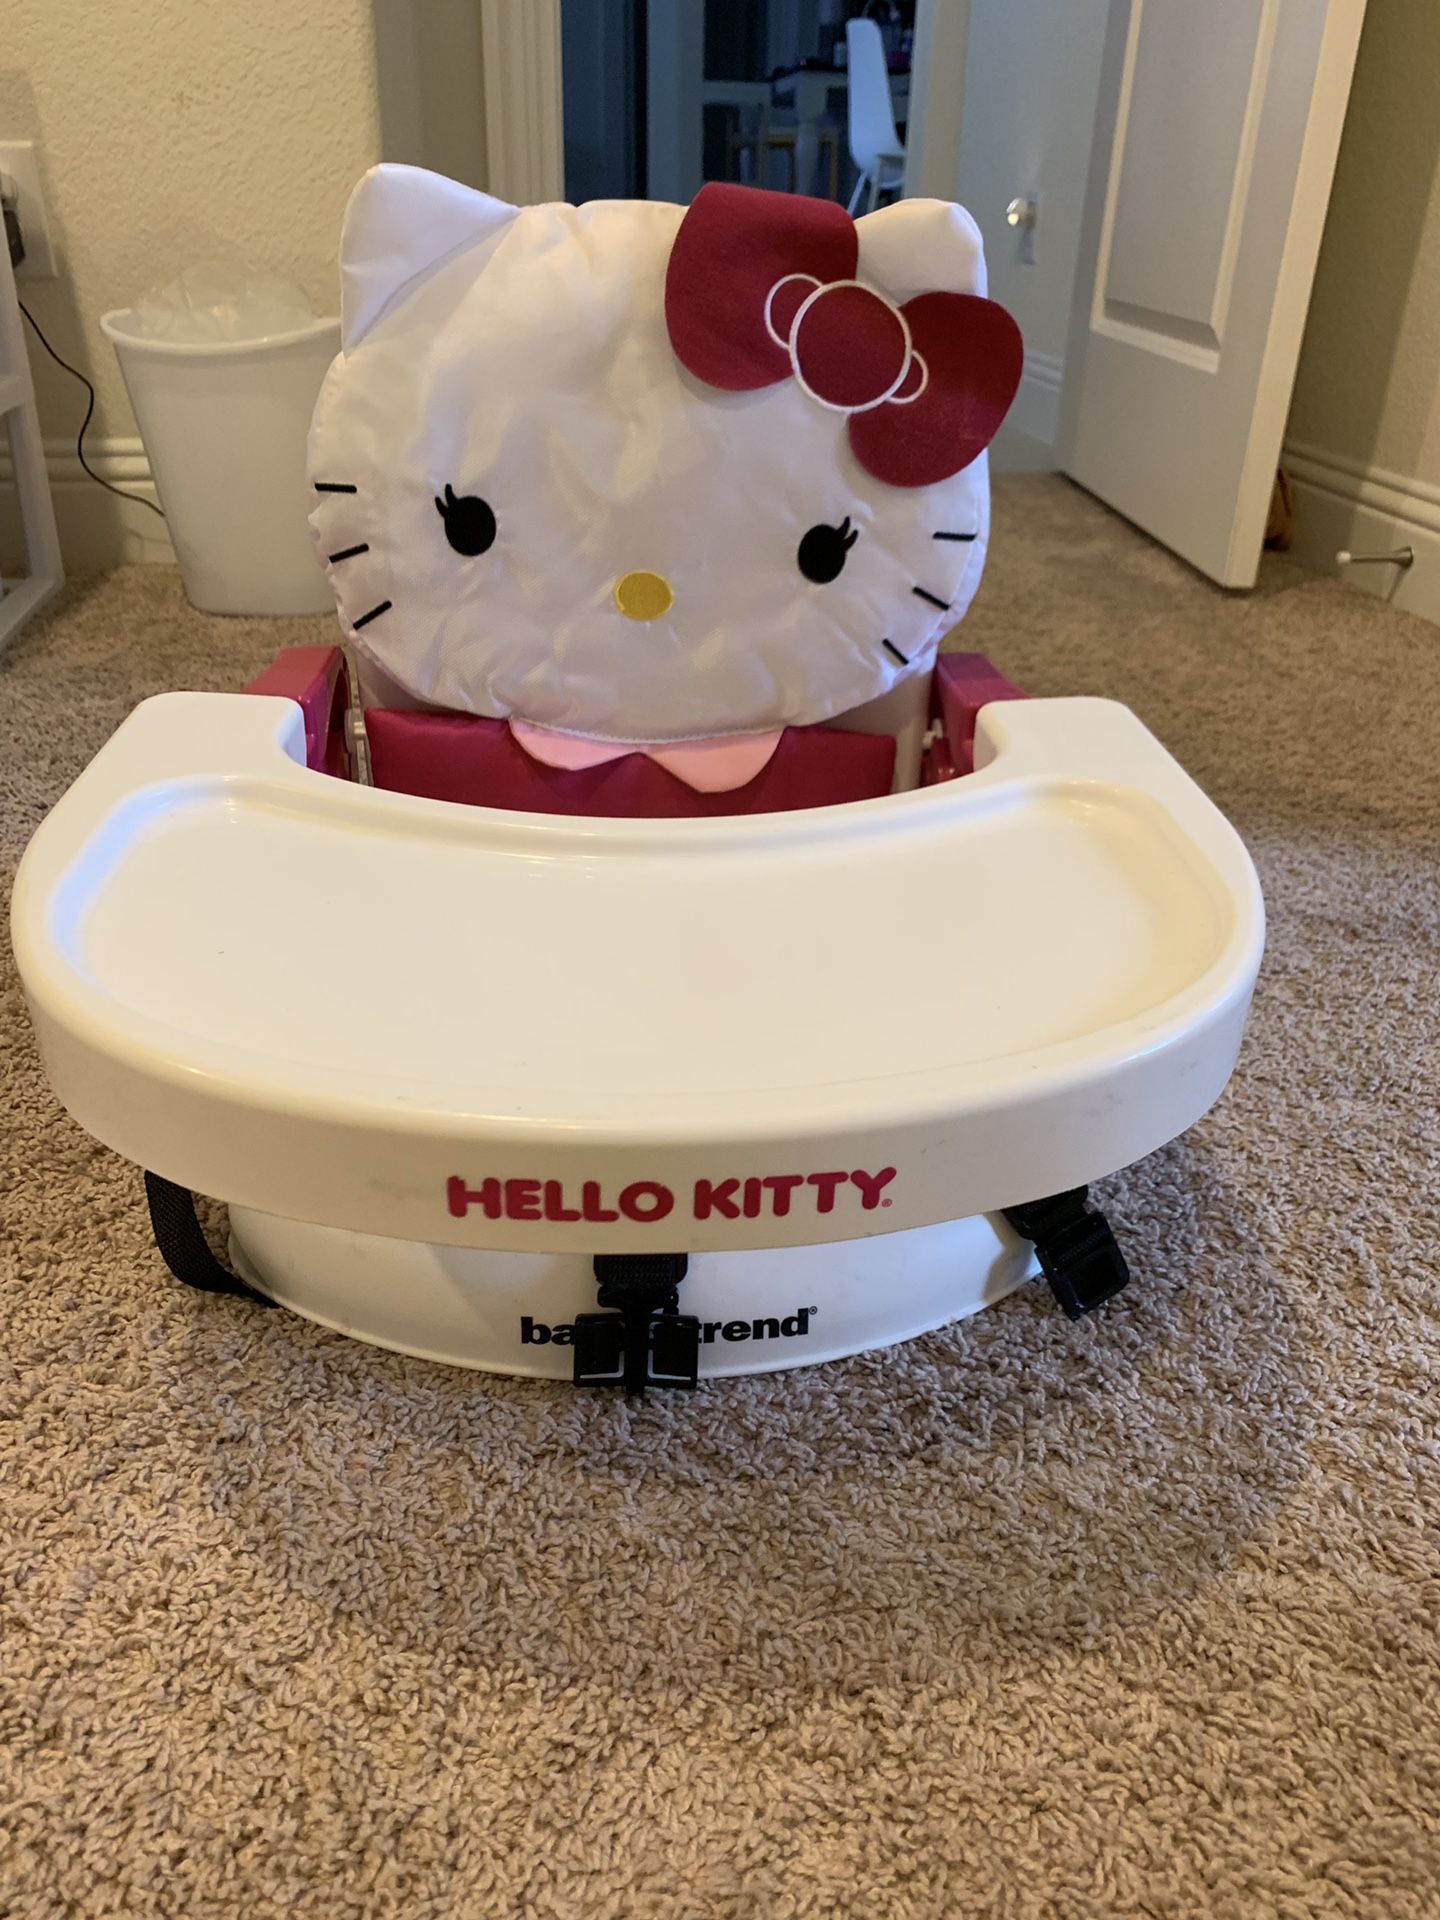 Baby trend portable hello kitty high chair